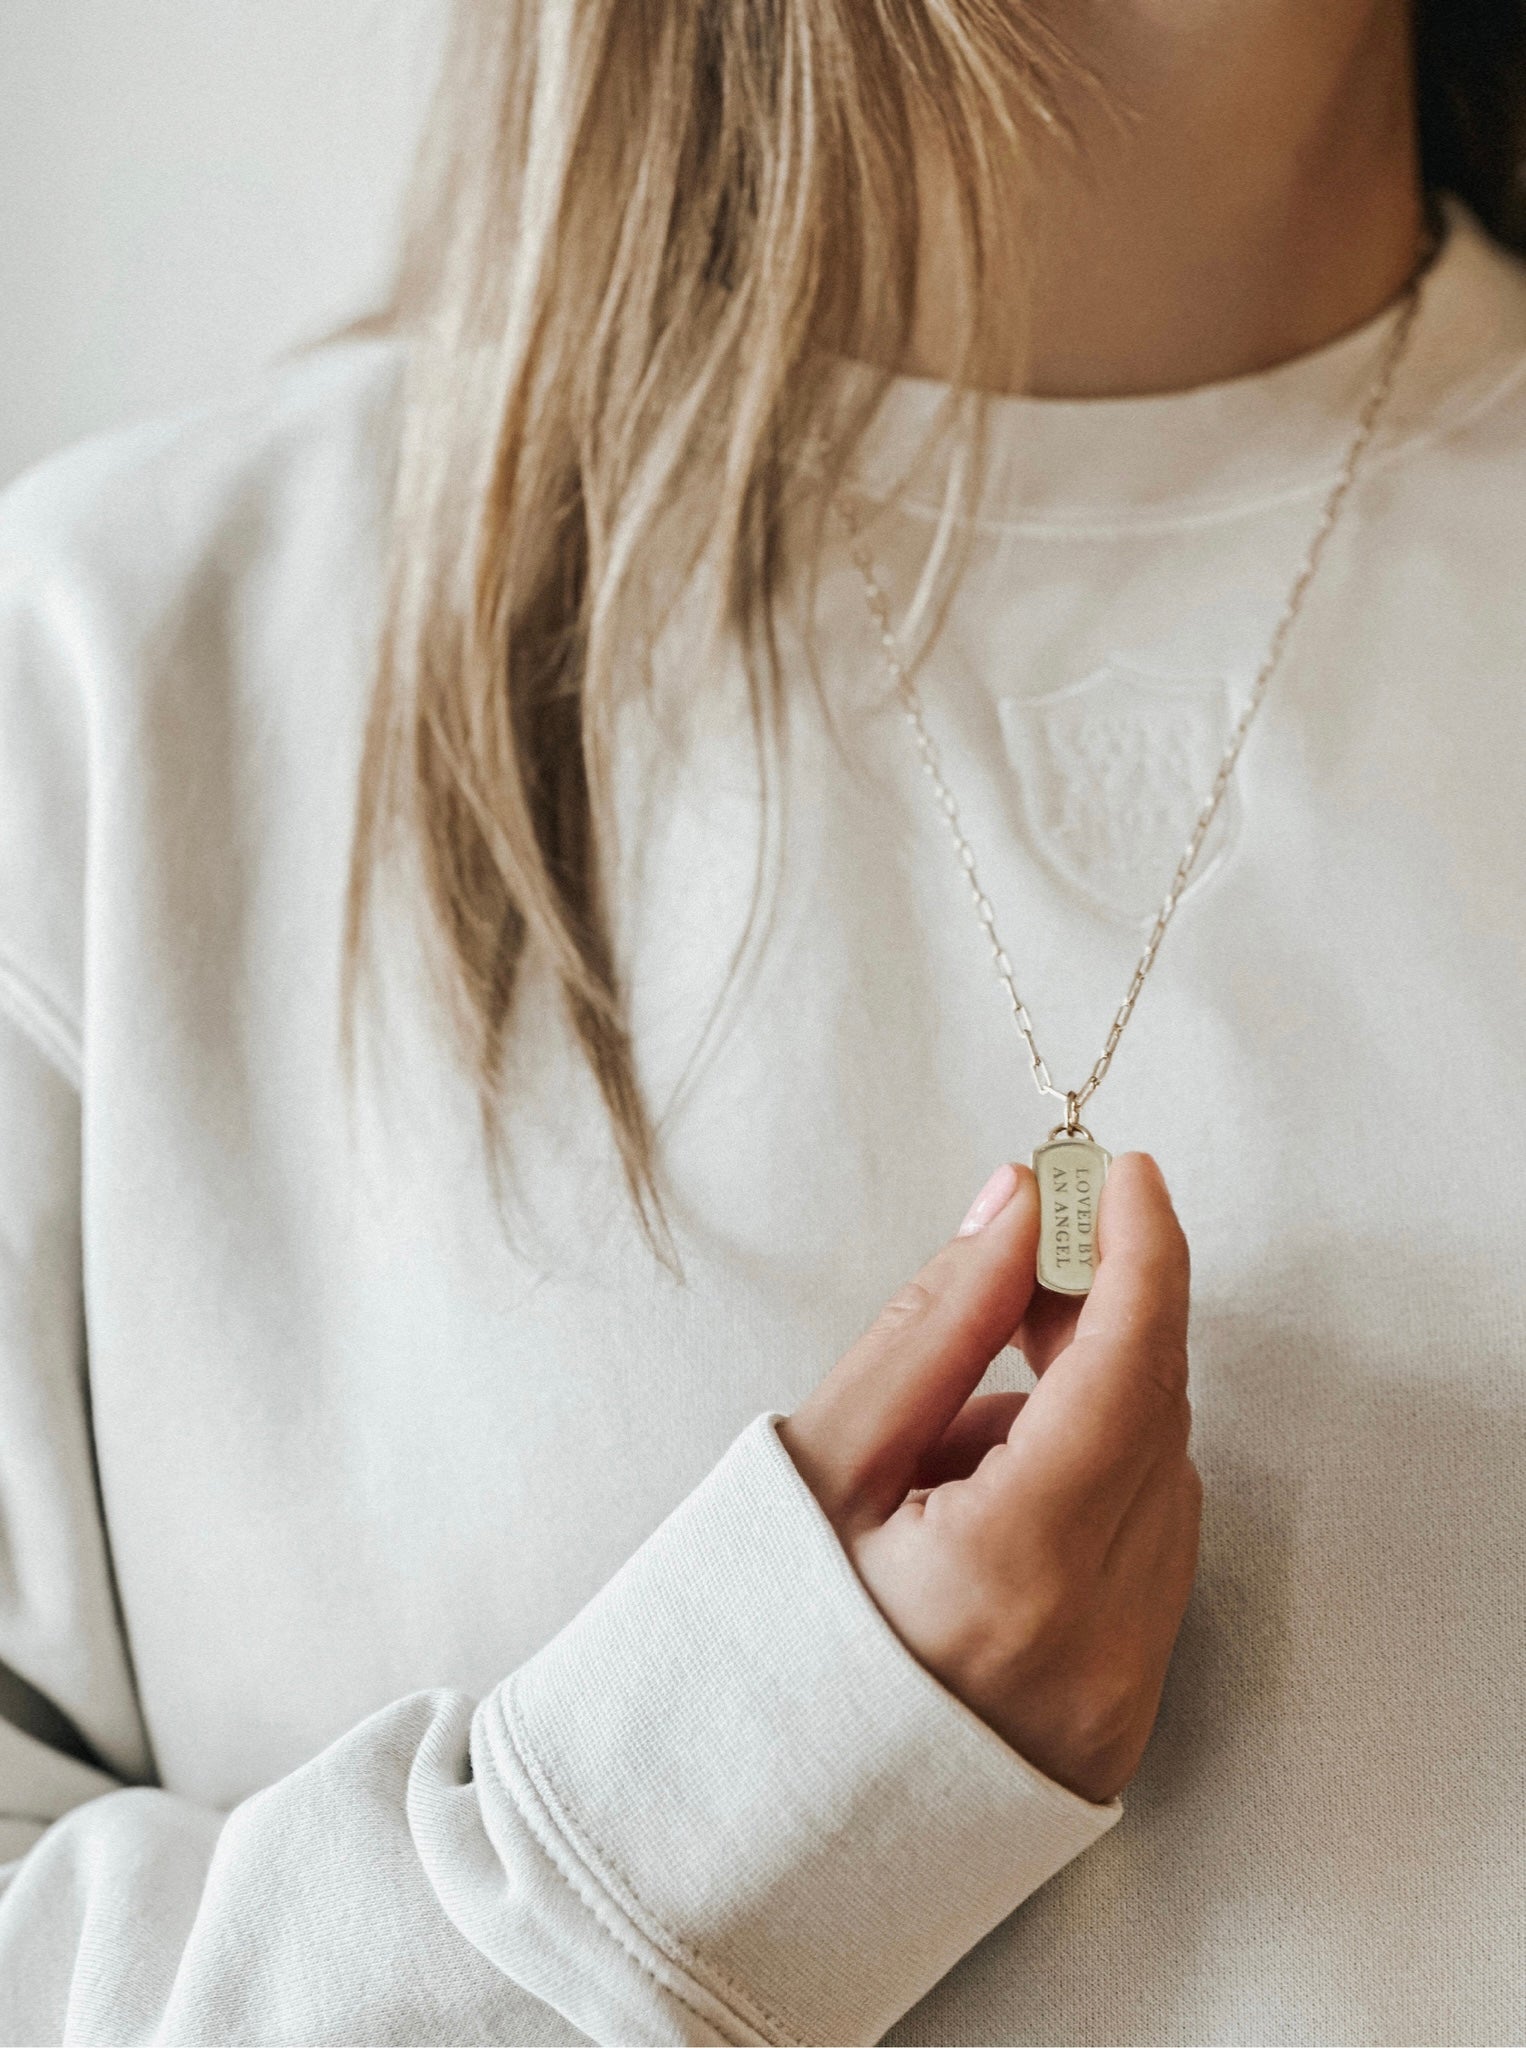 The Foundation Tag | Sterling Silver